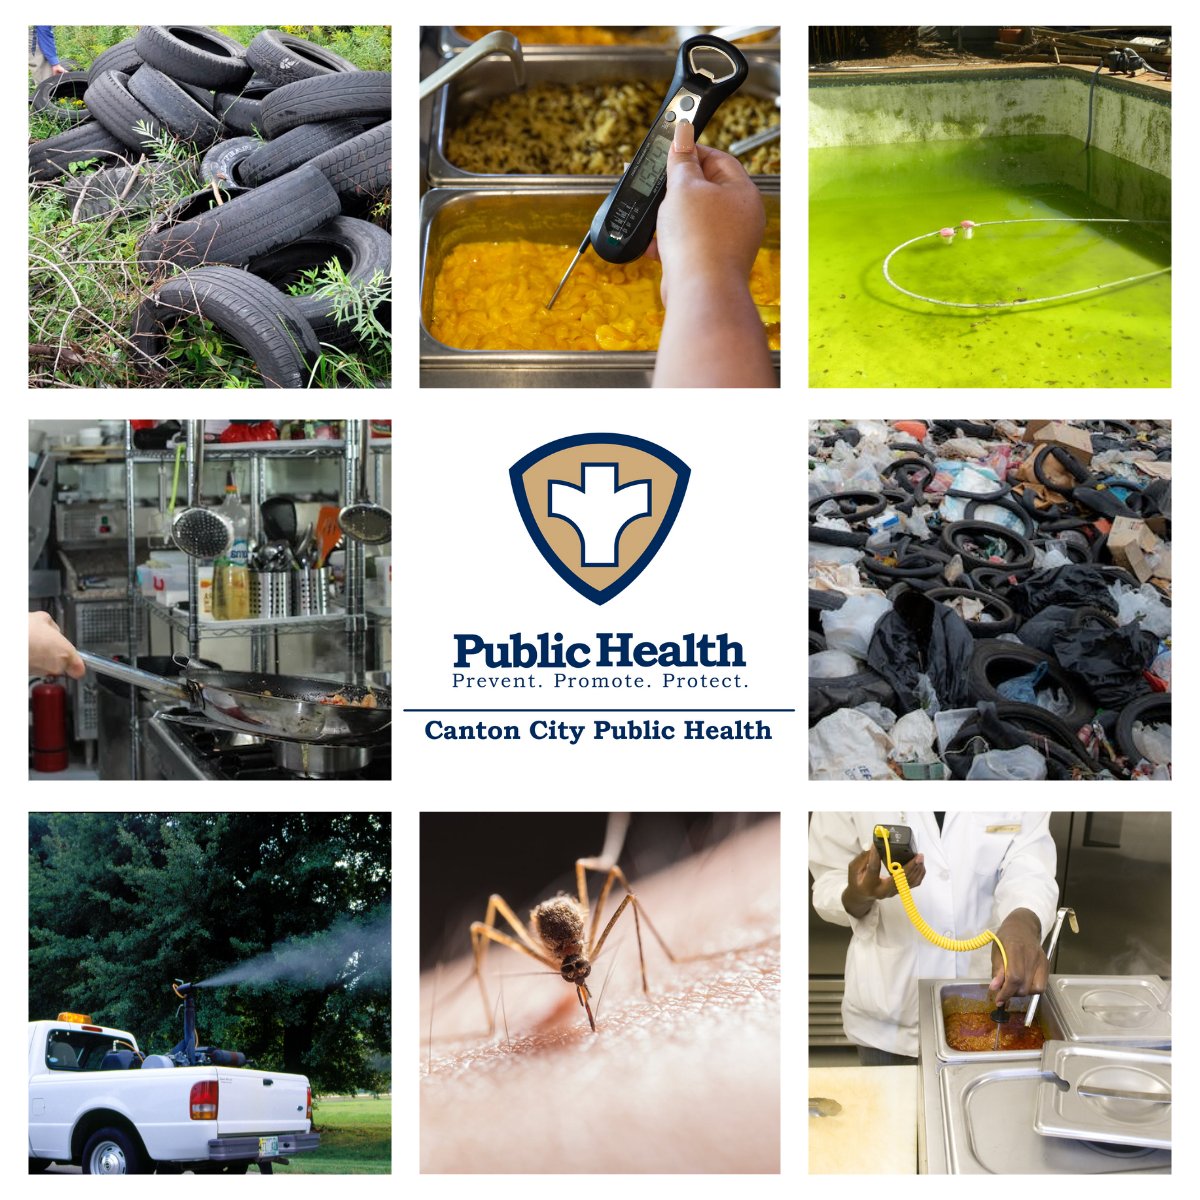 Start your public health career at CCPH as an Environmental Health Specialist!

Apply by 11:59PM tonight! 
bit.ly/environmentalh…

#cantonhealth #PublicHealthJobs   #cantonohio #publichealth #environmentalhealth